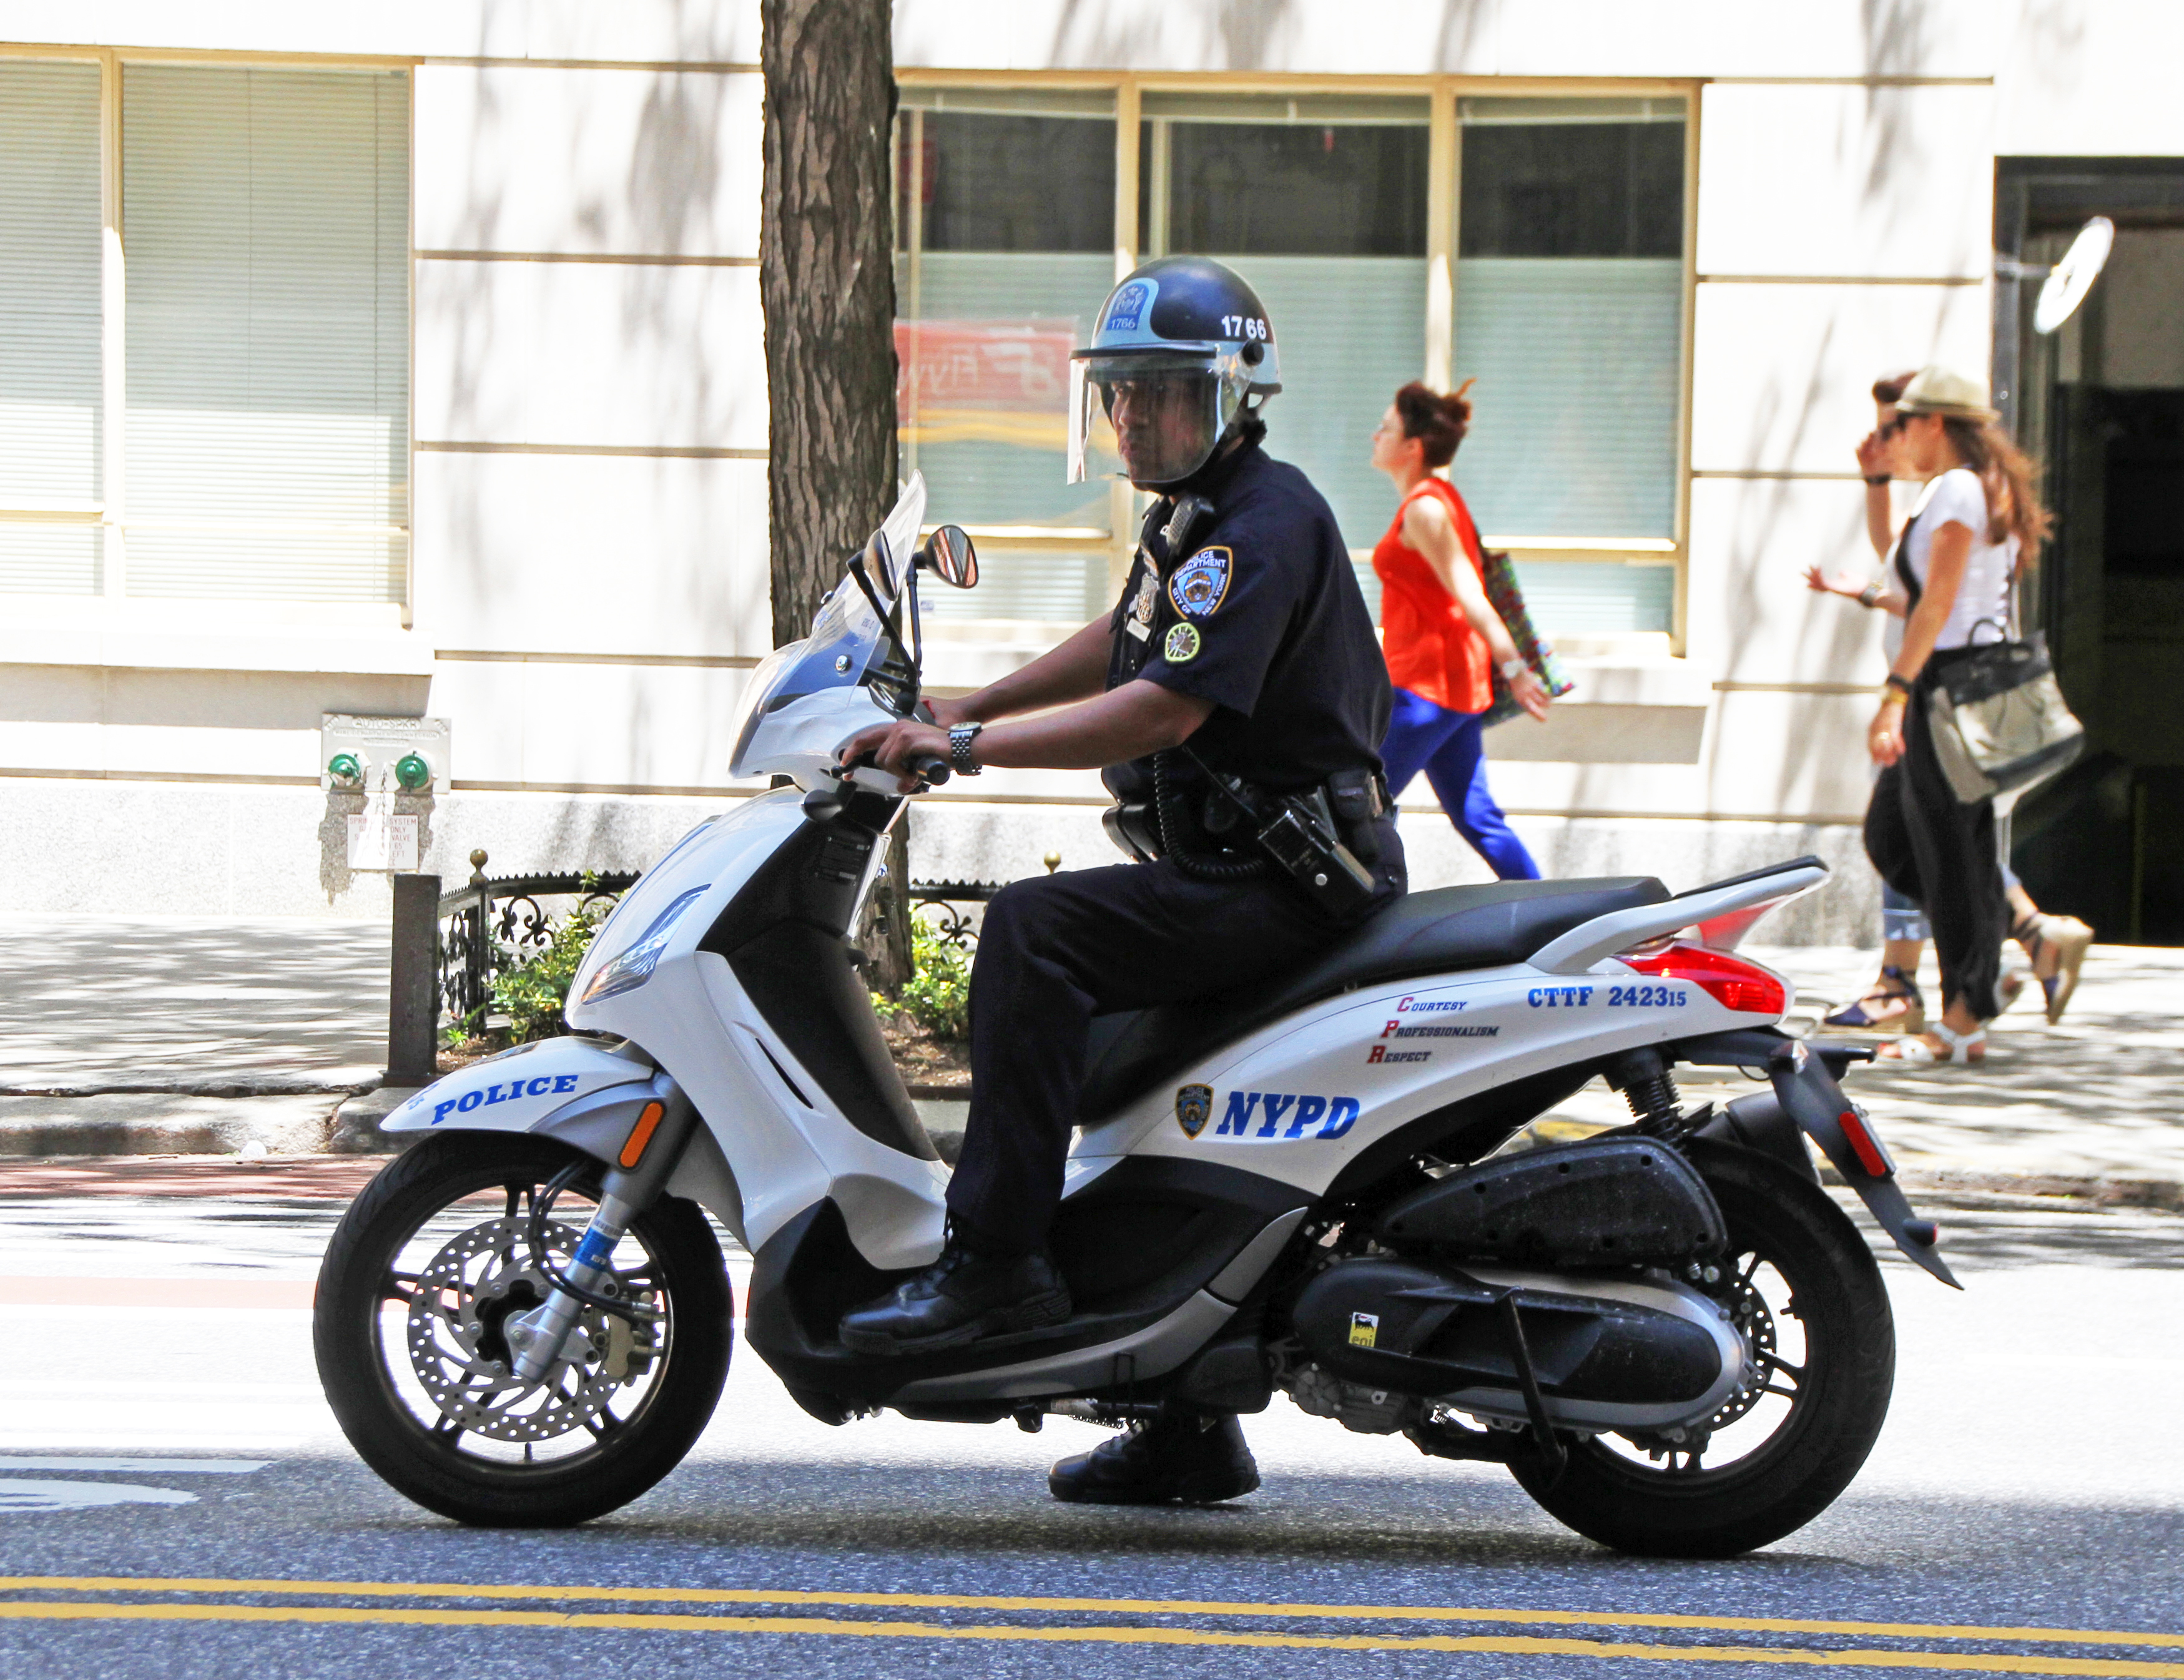 Police Scooter (27886178366).jpg - Wikimedia Commons